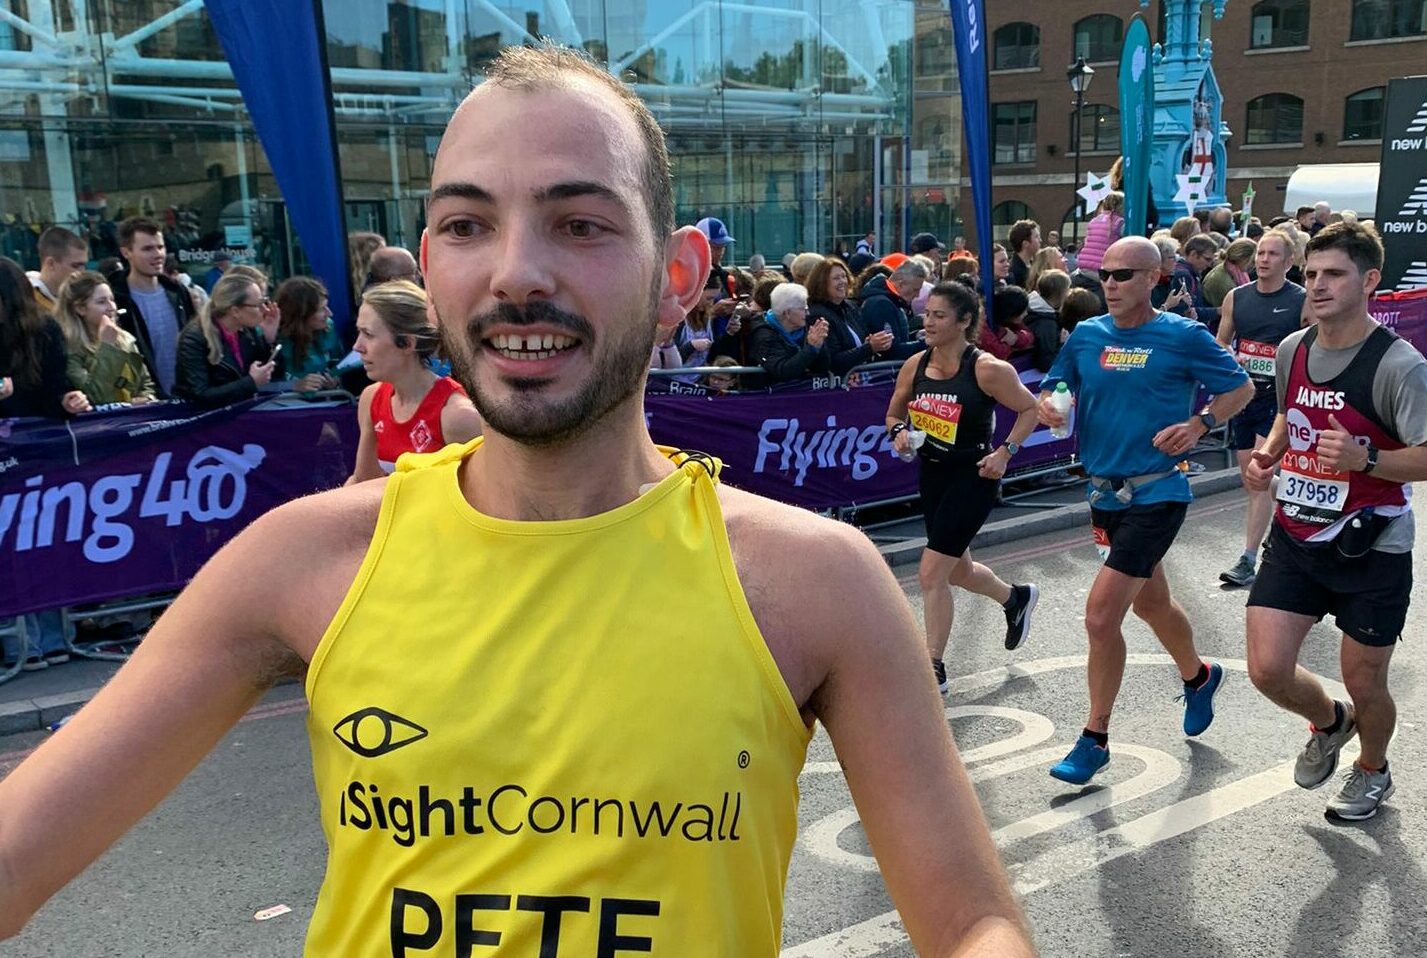 Peter Brodey runs for iSightCornwall in the London Marathon in 2021